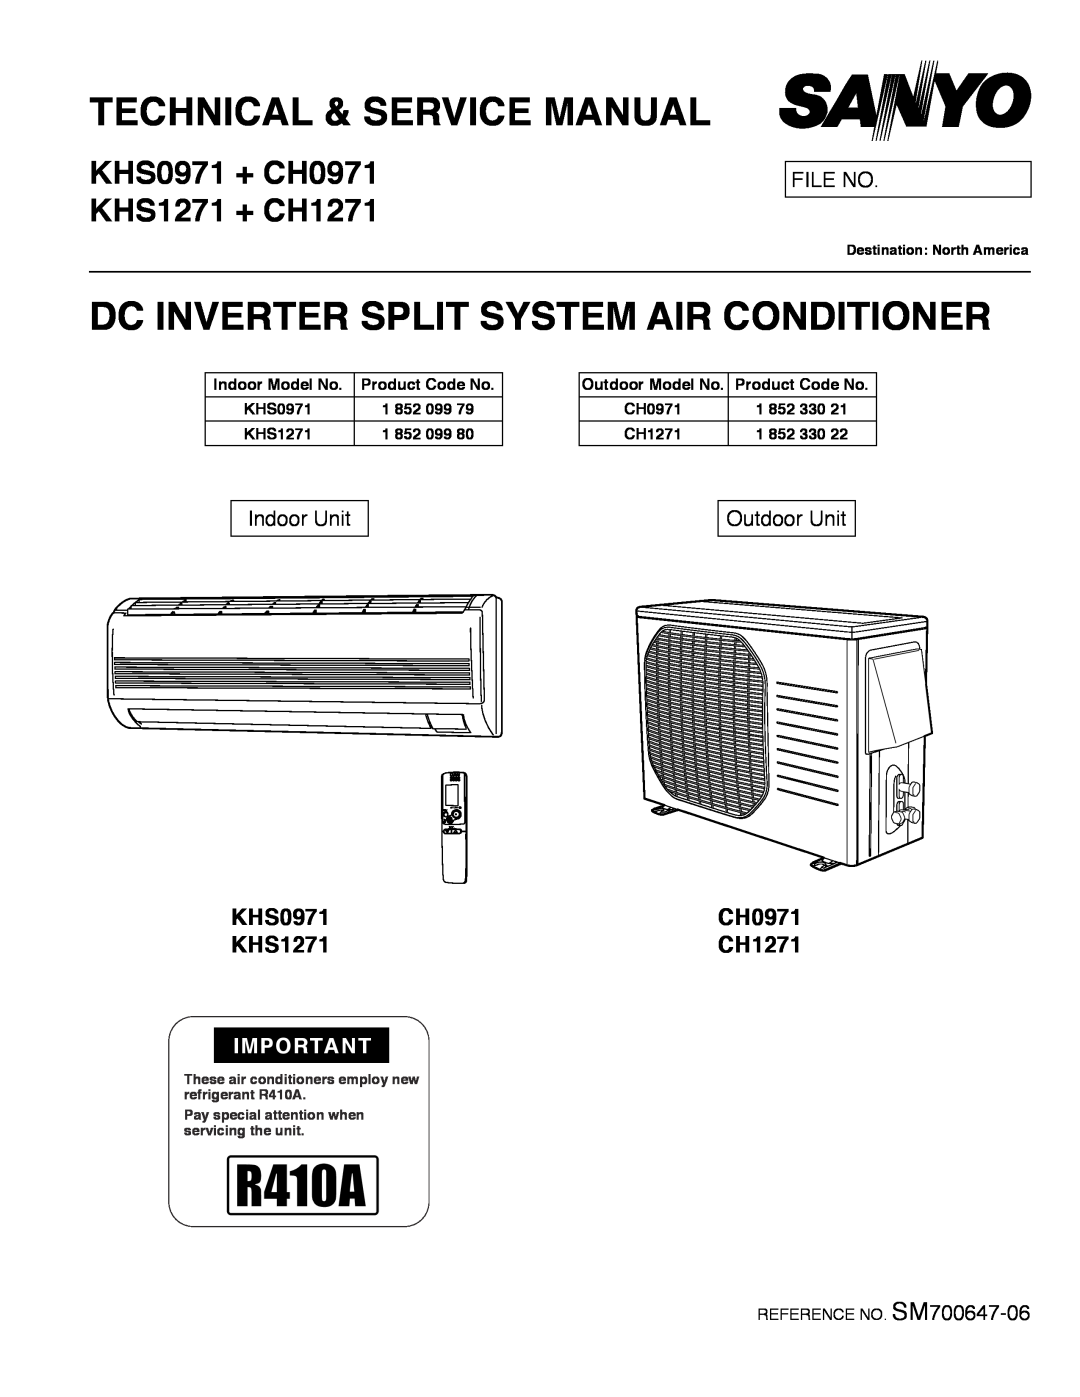 Sanyo service manual KHS0971 + CH0971 KHS1271 + CH1271, Dc Inverter Split System Air Conditioner, File No, Indoor Unit 